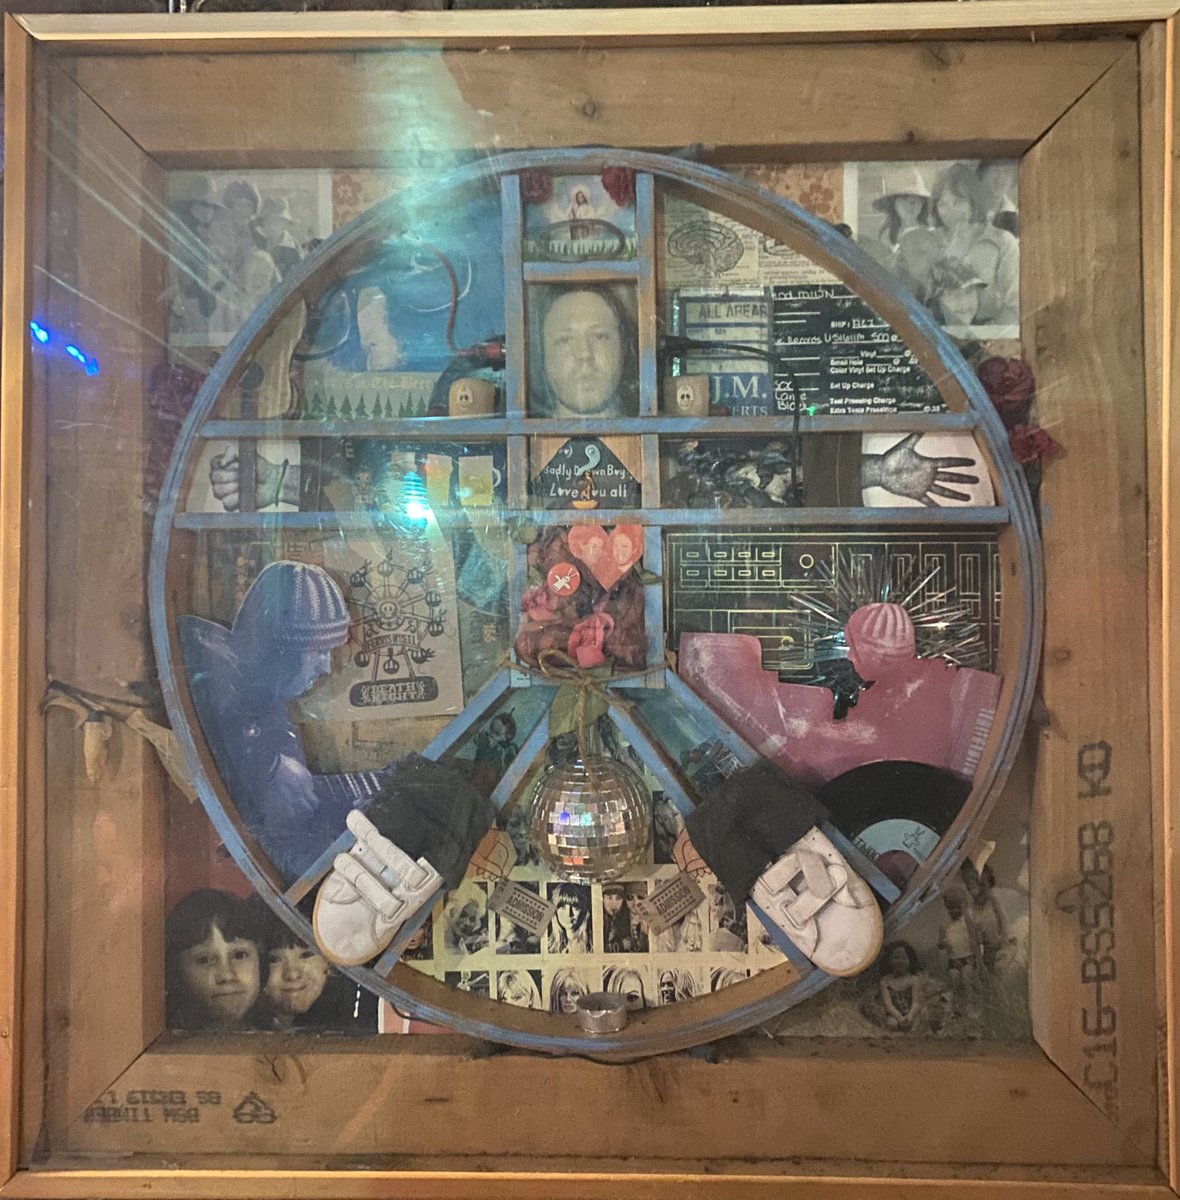 If you are going to #VinylAdventuresMCR this weekend then check out @AndyVotel ‘s expo at @33OldhamStreet it includes this @badly_drawn_boy artwork! Ace